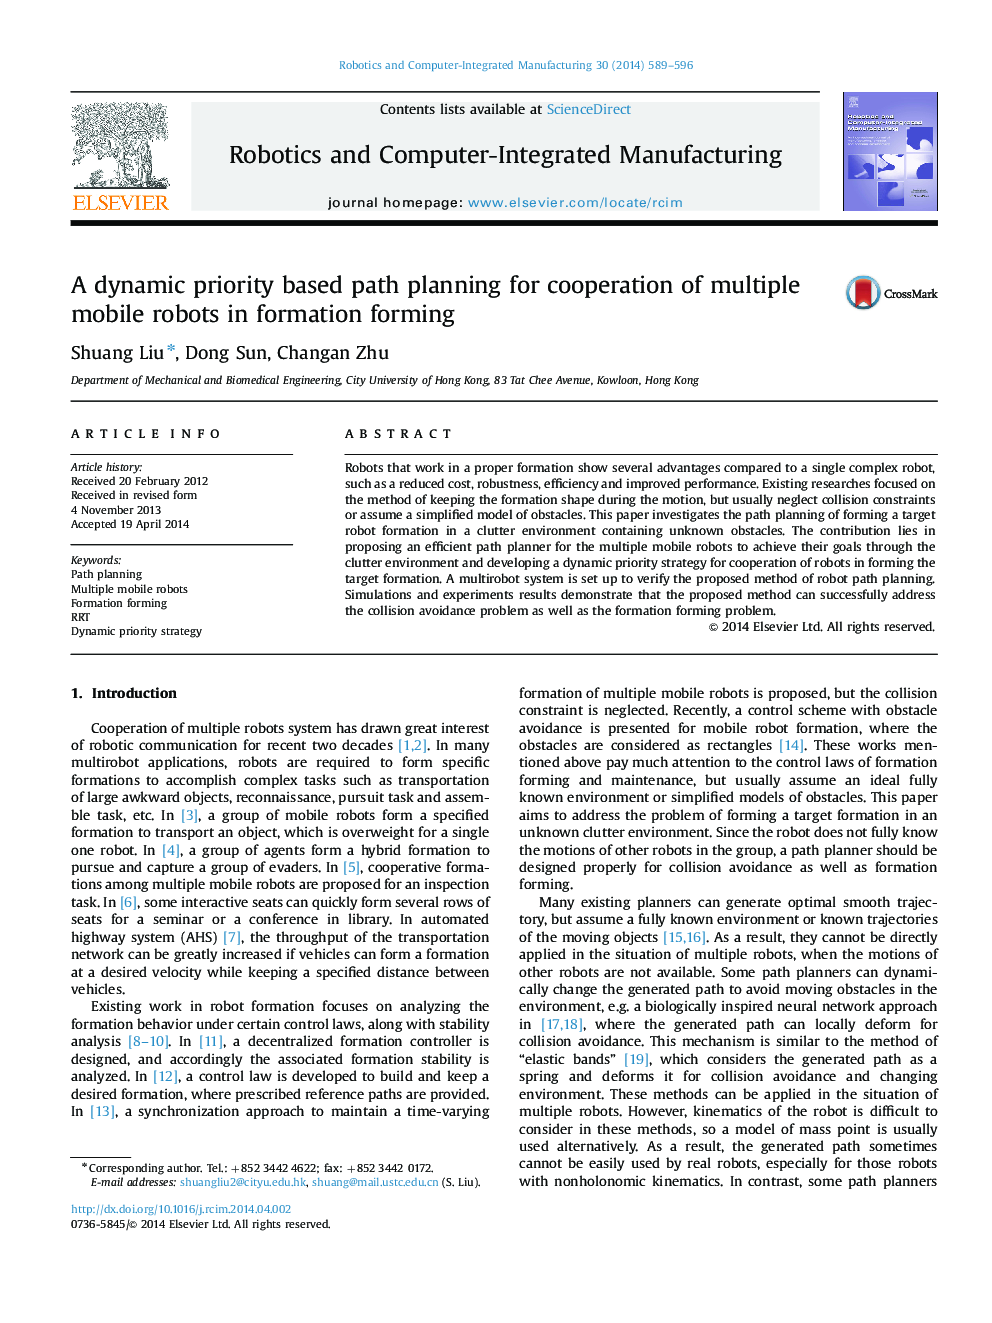 A dynamic priority based path planning for cooperation of multiple mobile robots in formation forming